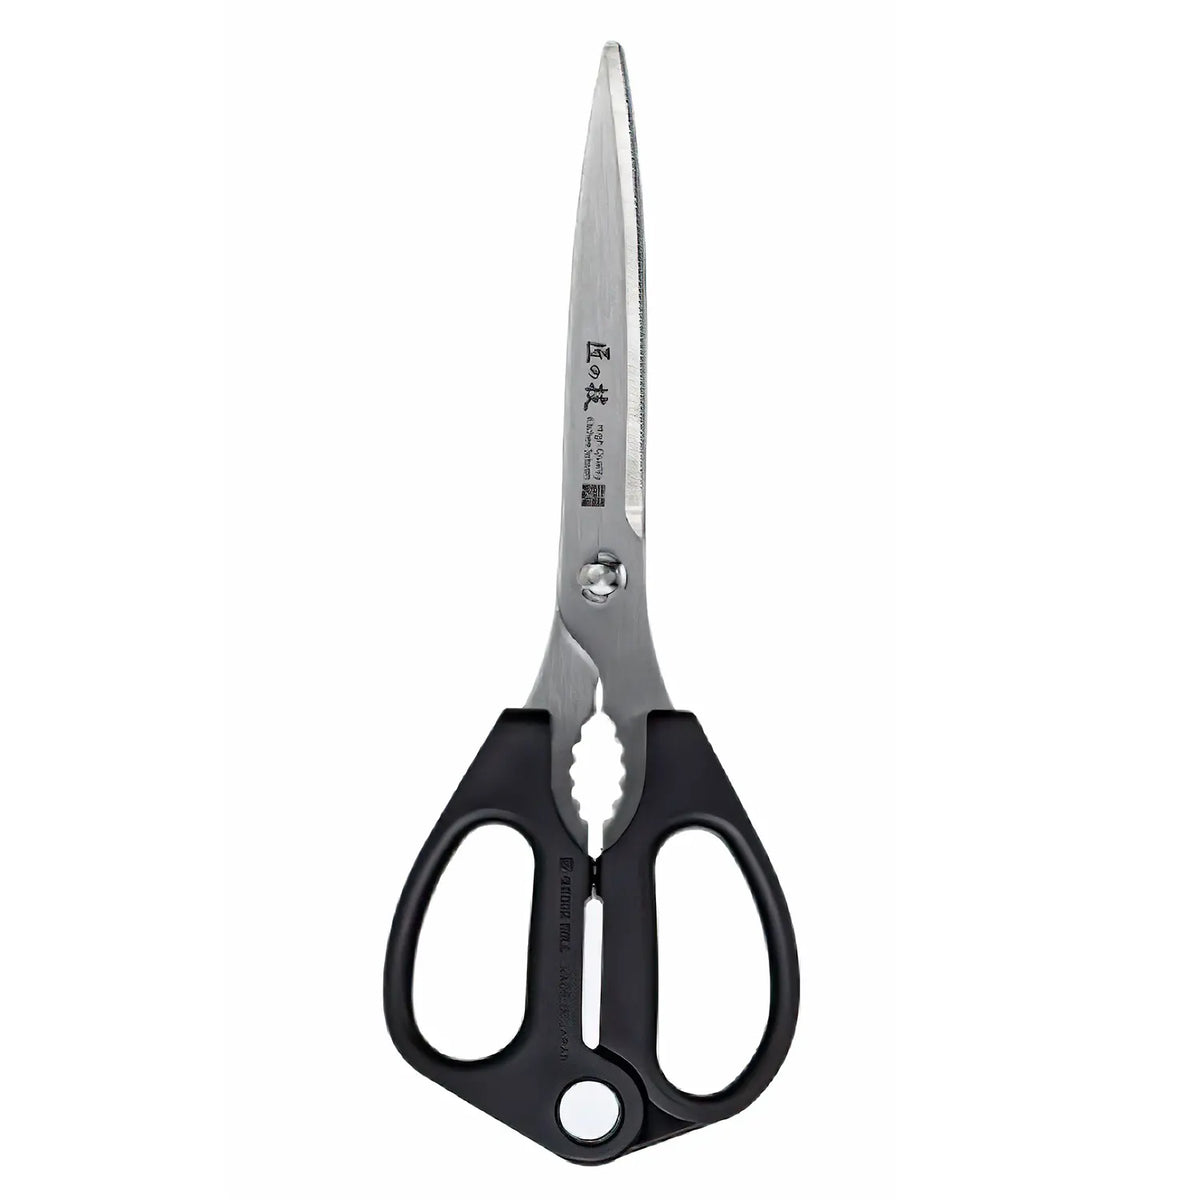 Kitchen Scissors for Meat Fish Plant and Gardening Serrated